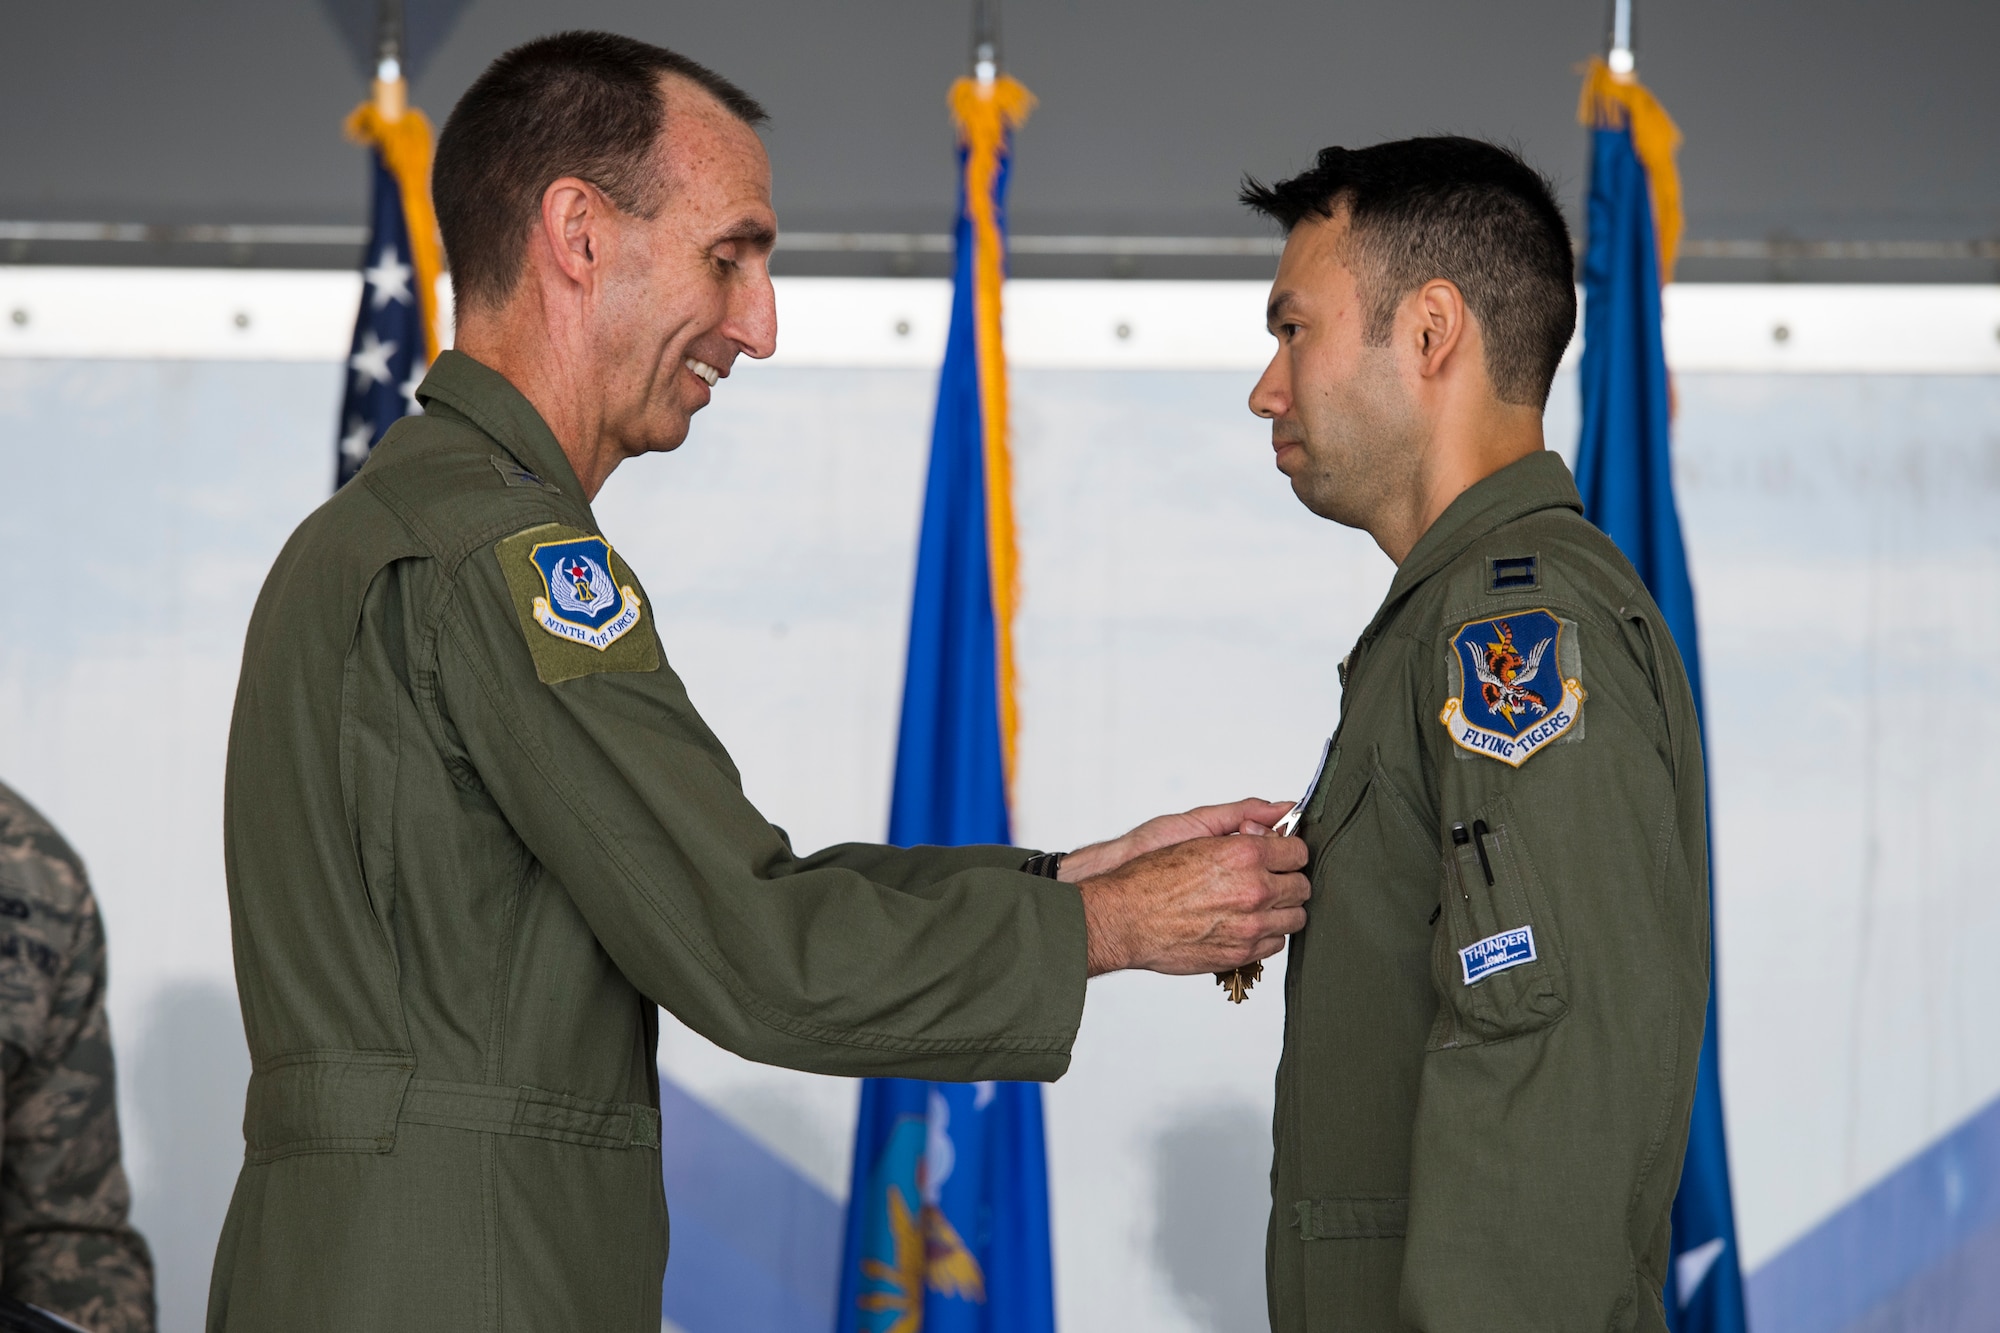 U.S. Air Force Maj. Gen. Scott Zobrist, left, 9th Air Force commander, places a Distinguished Flying Cross medal on Capt. William “Archer” Dana, 74th Fighter Squadron A-10C Thunderbolt II pilot, during an award ceremony, May 23, 2018, at Moody Air Force Base, Ga. Dana, along with his wingman, was alerted Aug. 14, 2017, by a Joint Terminal Attack Controller the enemy had breached friend lines in eight locations. In a three-hour period, Dana employed 11,000 pounds of ordnance and destroyed 10 enemy defensive fighting positions. (U.S. Air Force photo by Senior Airman Janiqua P. Robinson)